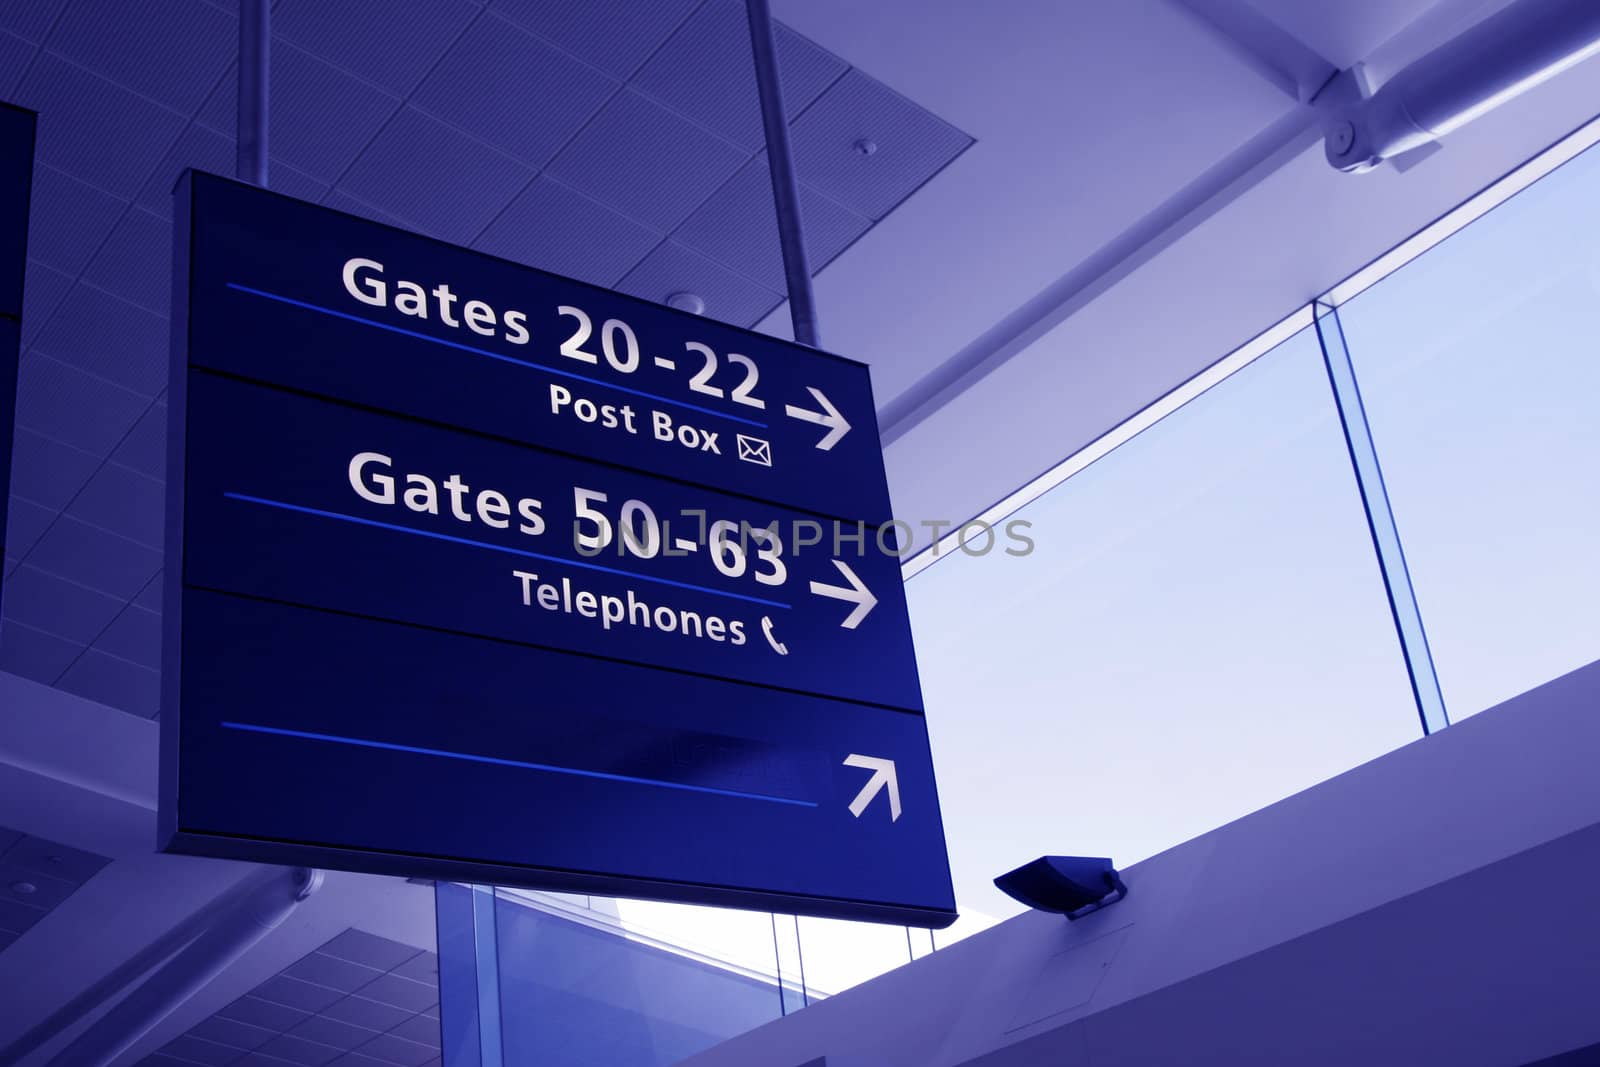 Airport Interior Architecture, Directions Sign And Glass Facade - Blue Toning